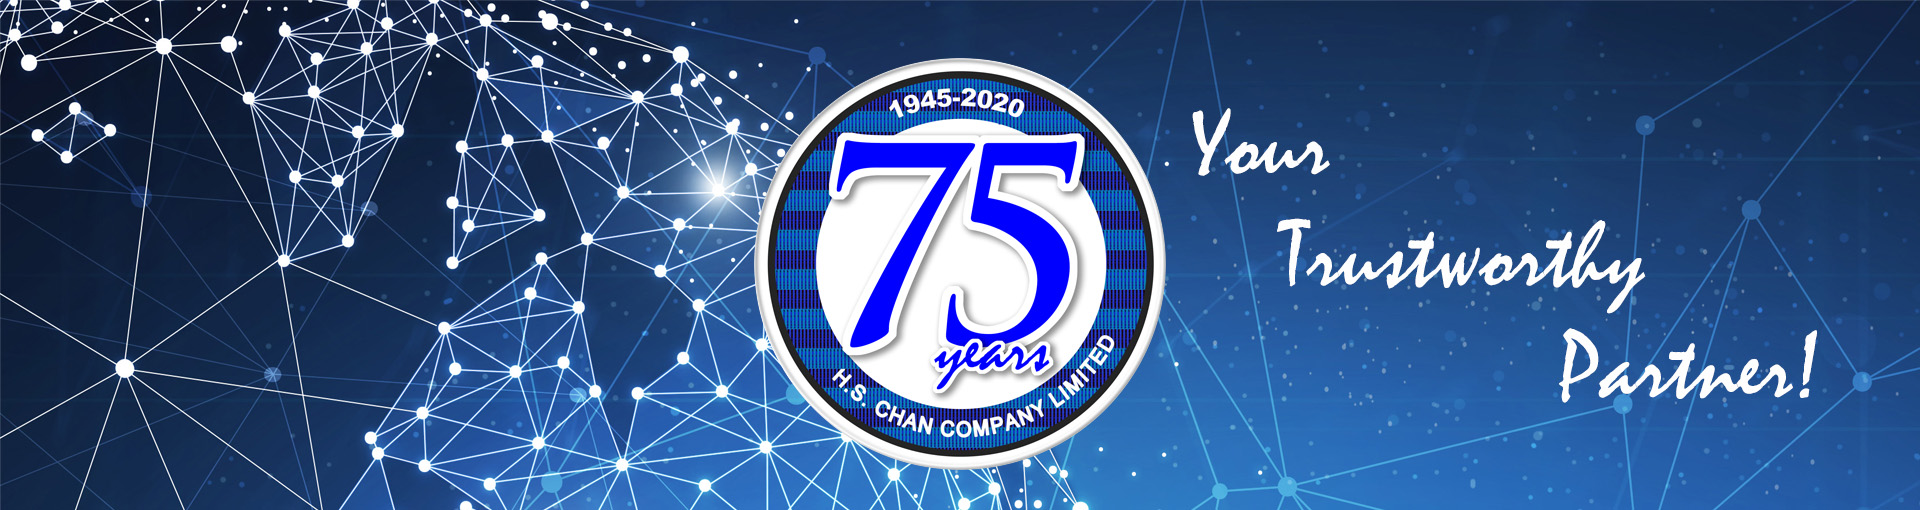 70 years 1945-2015 H.S. CHAN COMPANY LIMITED